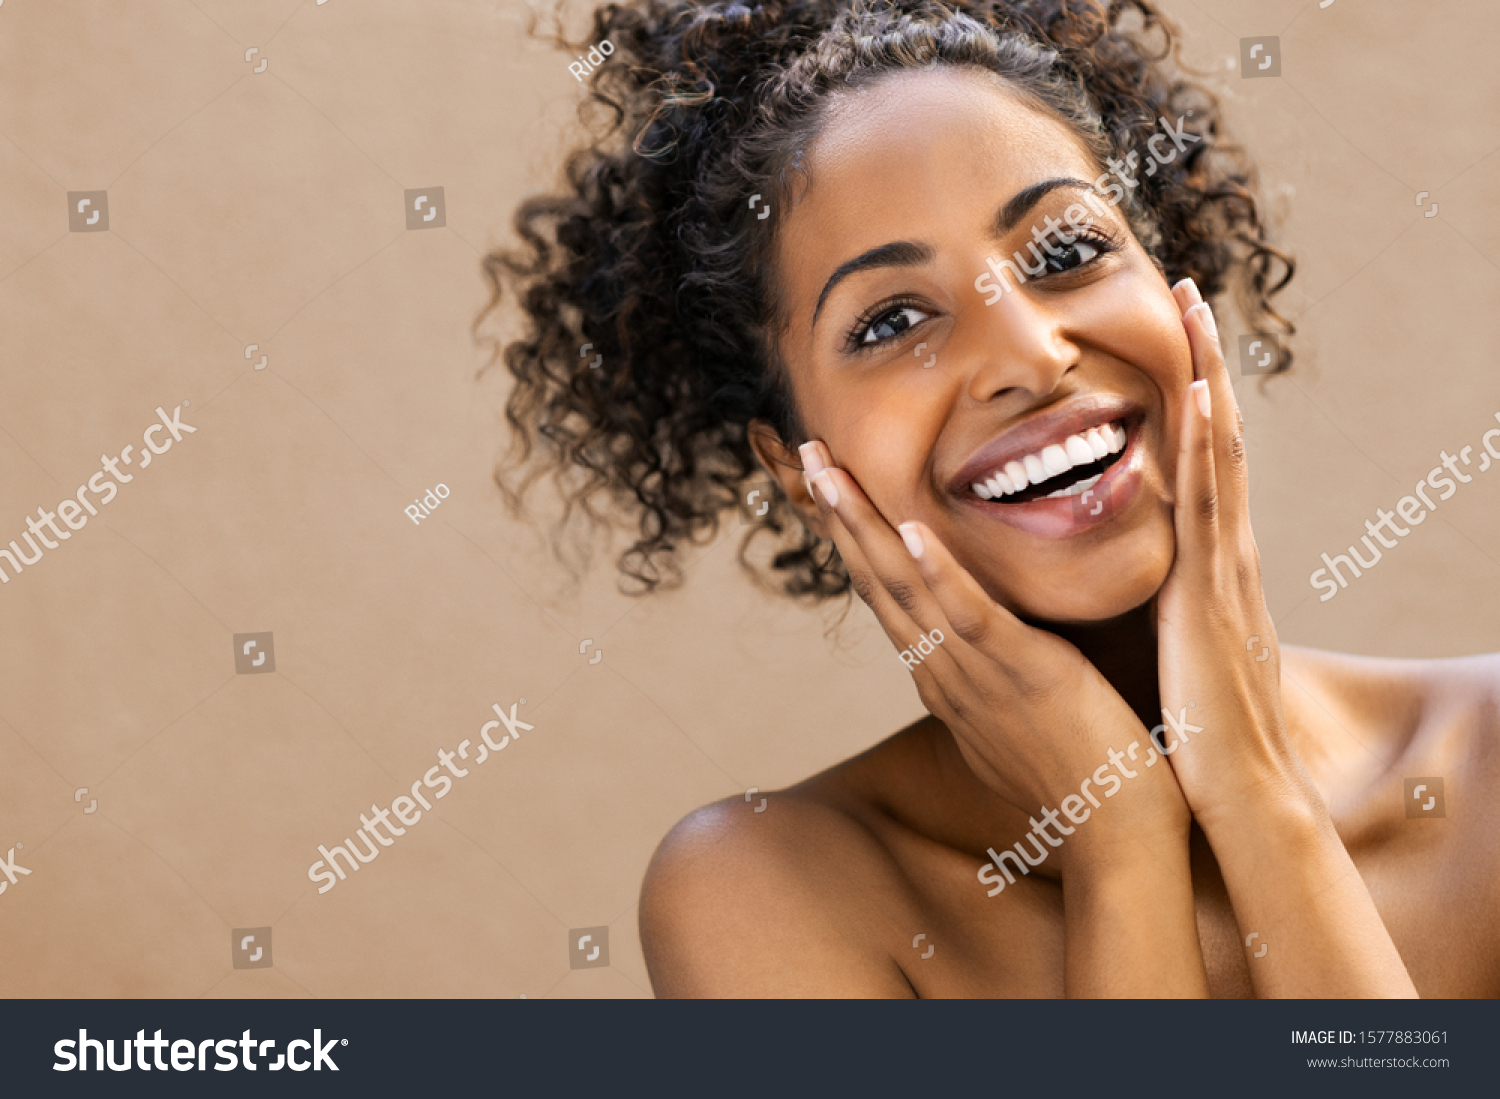 Beautiful young woman smiling after fantastic face treatment. Happy beauty african girl excited after spa treatment isolated on background with copy space. Surpise and astonishment beauty concept. #1577883061